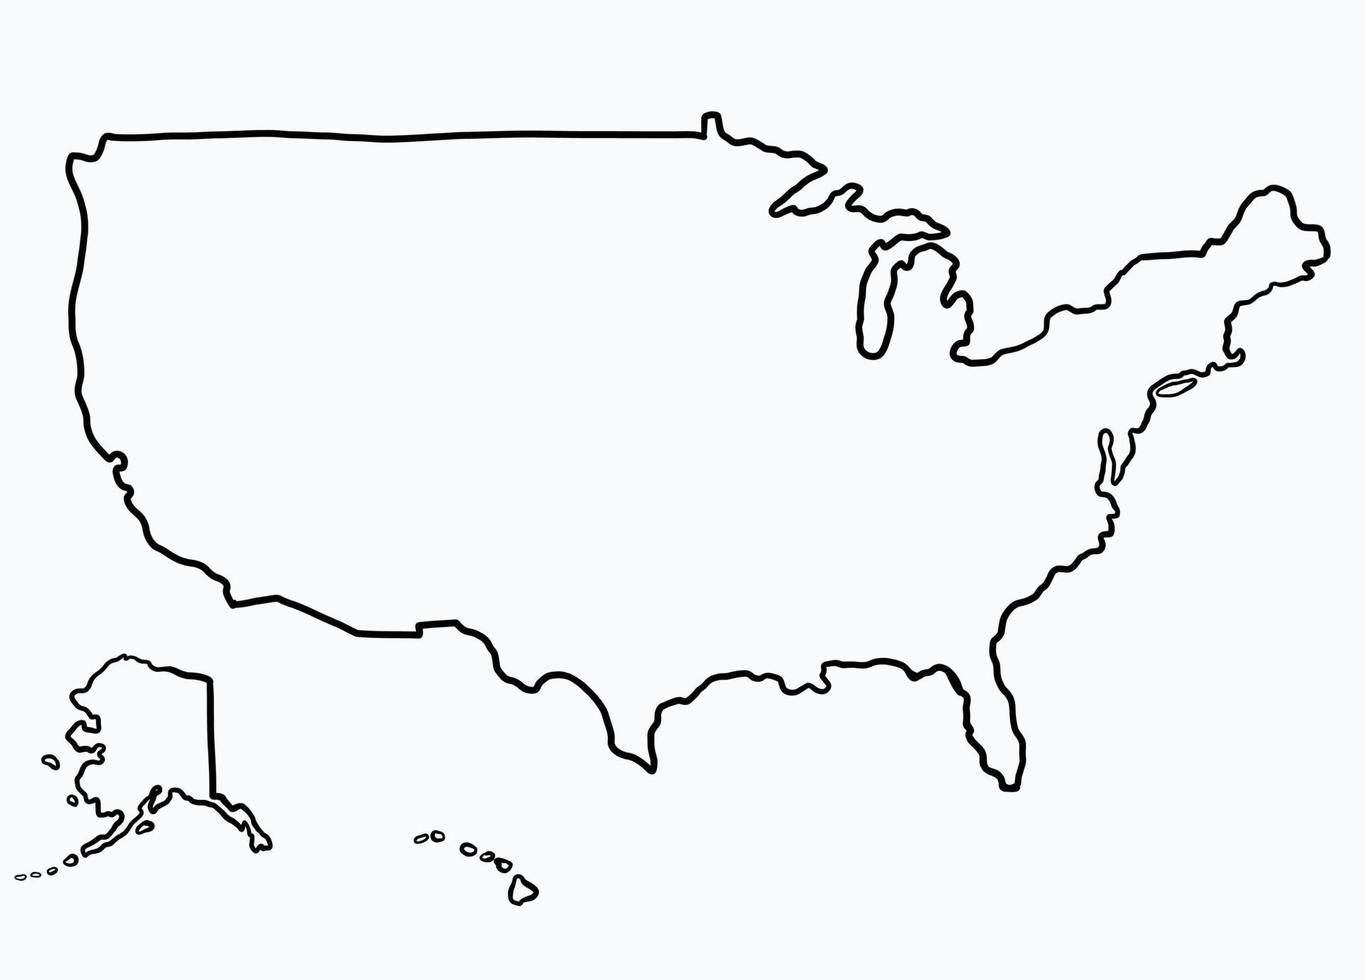 Doodle freehand drawing of united states of America map. V vector